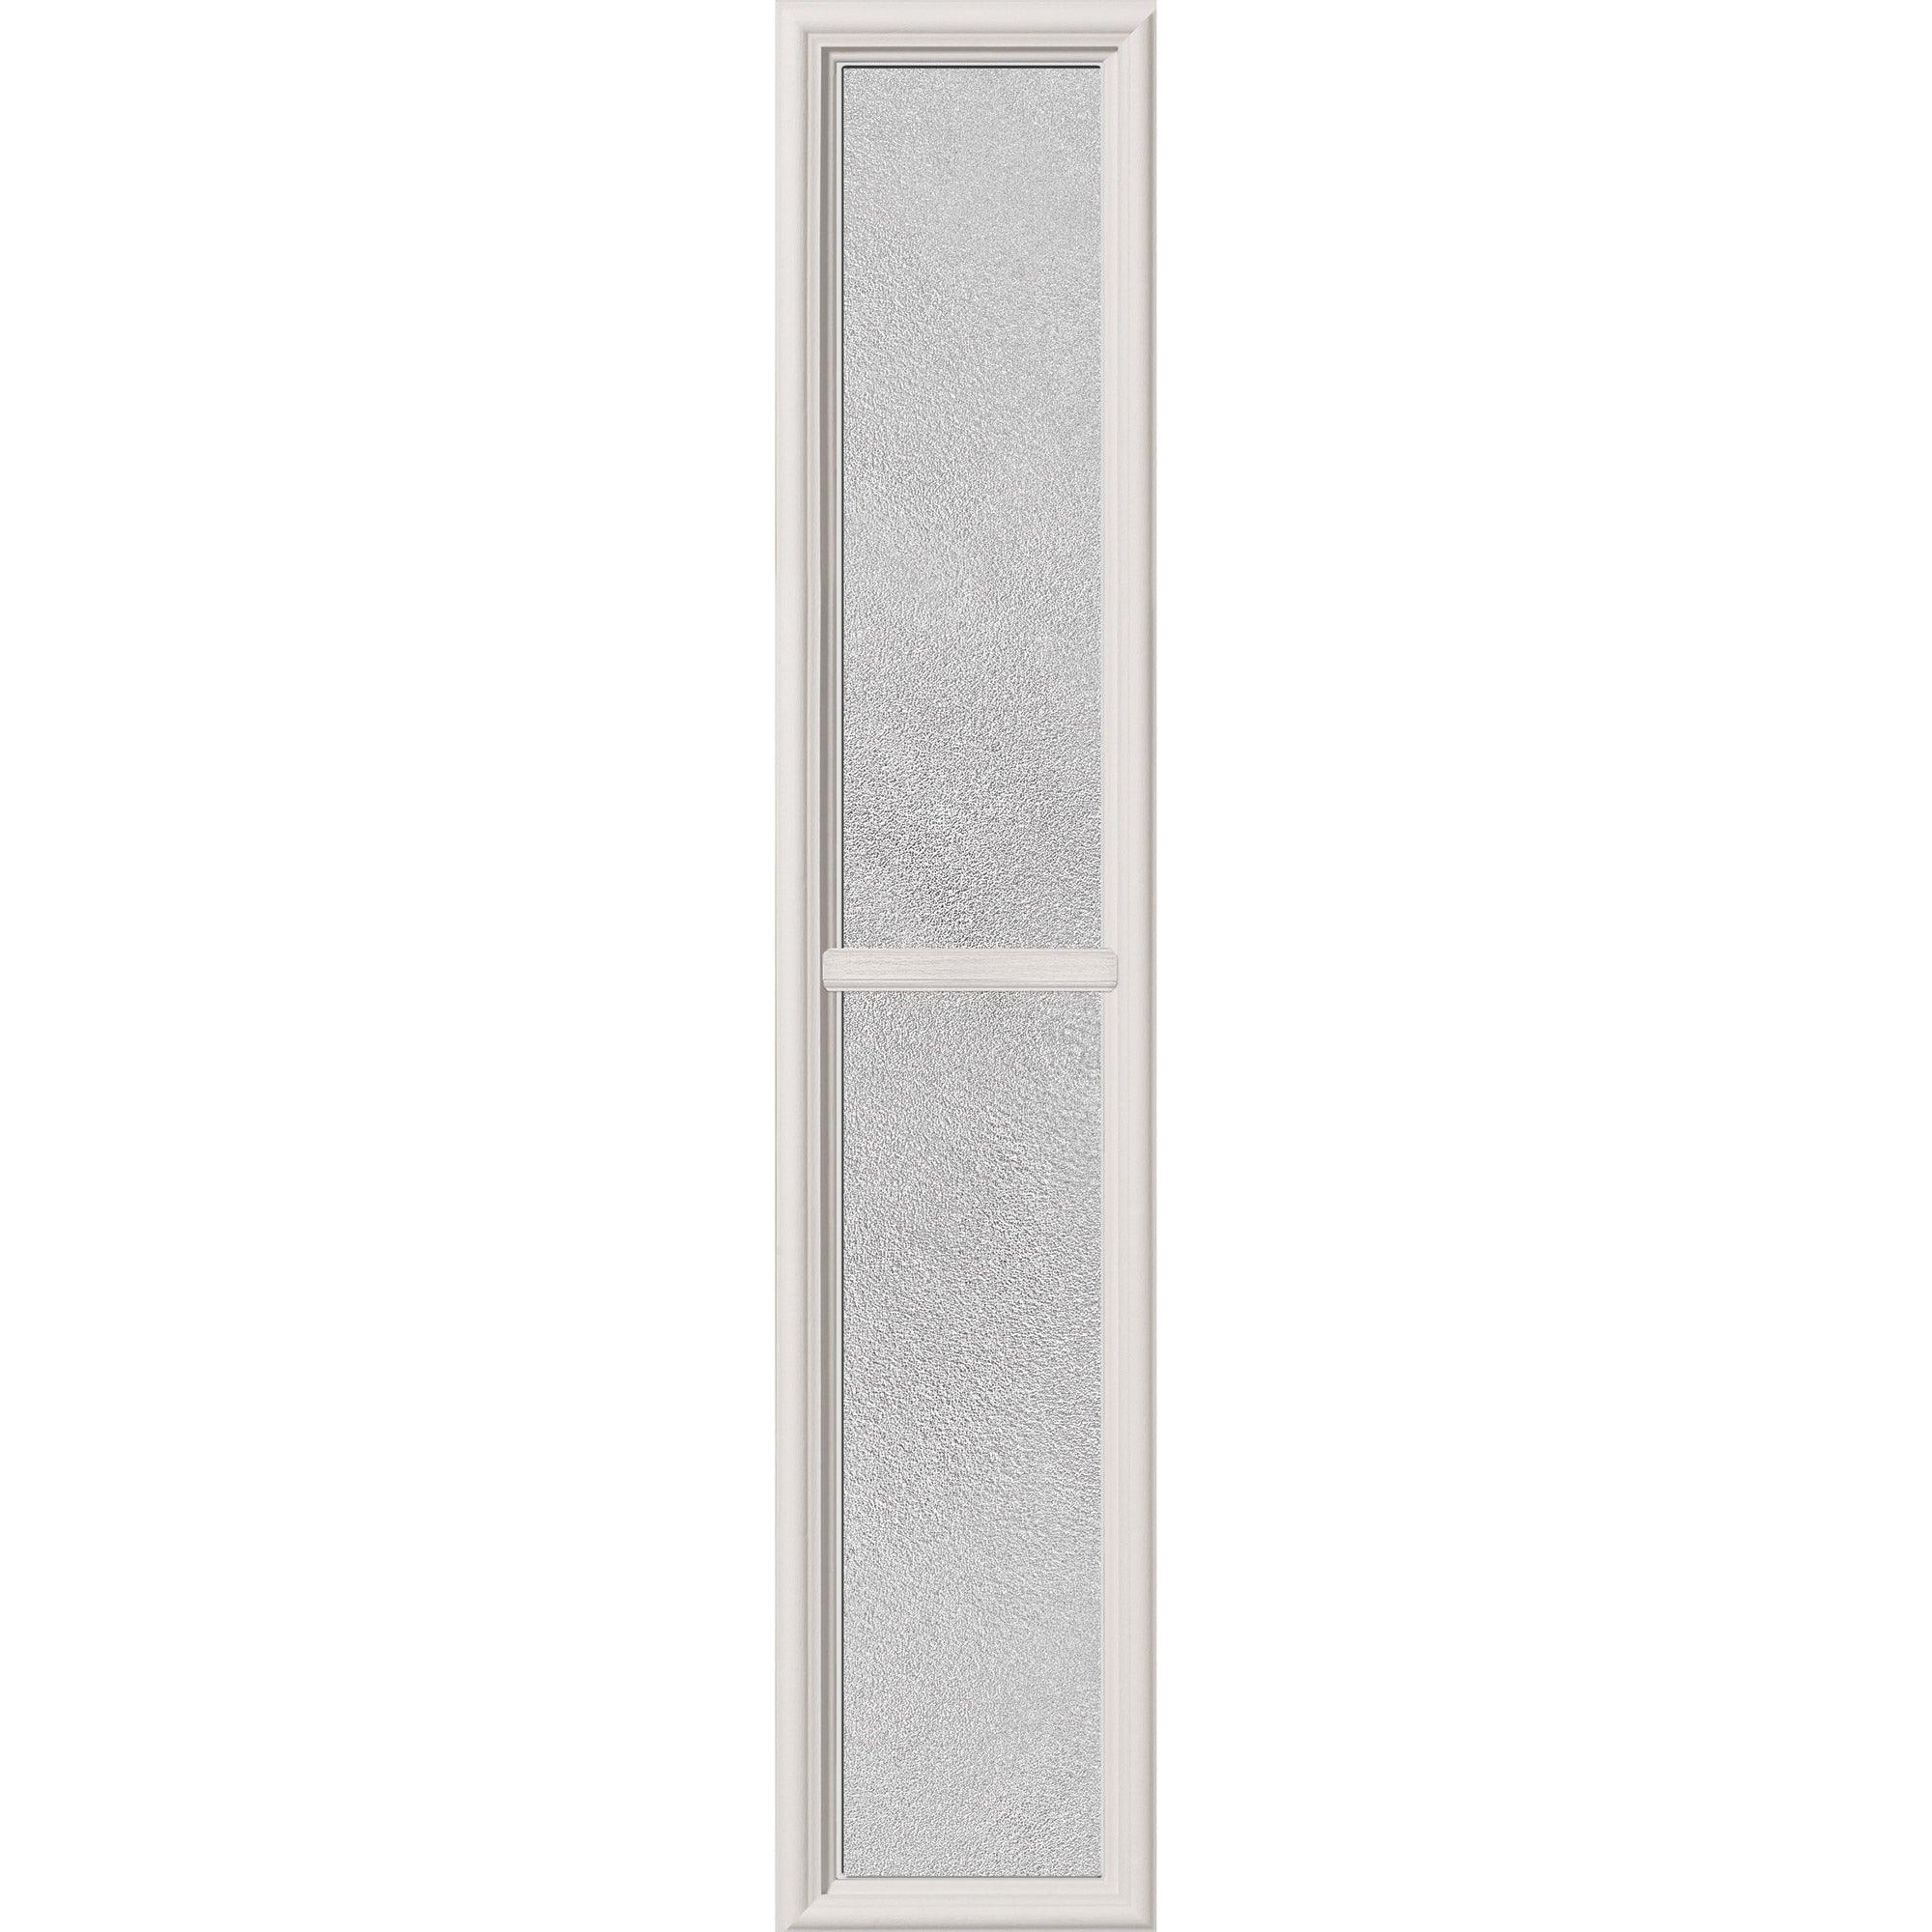 Clear Simulated 2 Lite Glass and Frame Kit (3/4 Sidelite 10" x 50" Frame Size) - Pease Doors: The Door Store